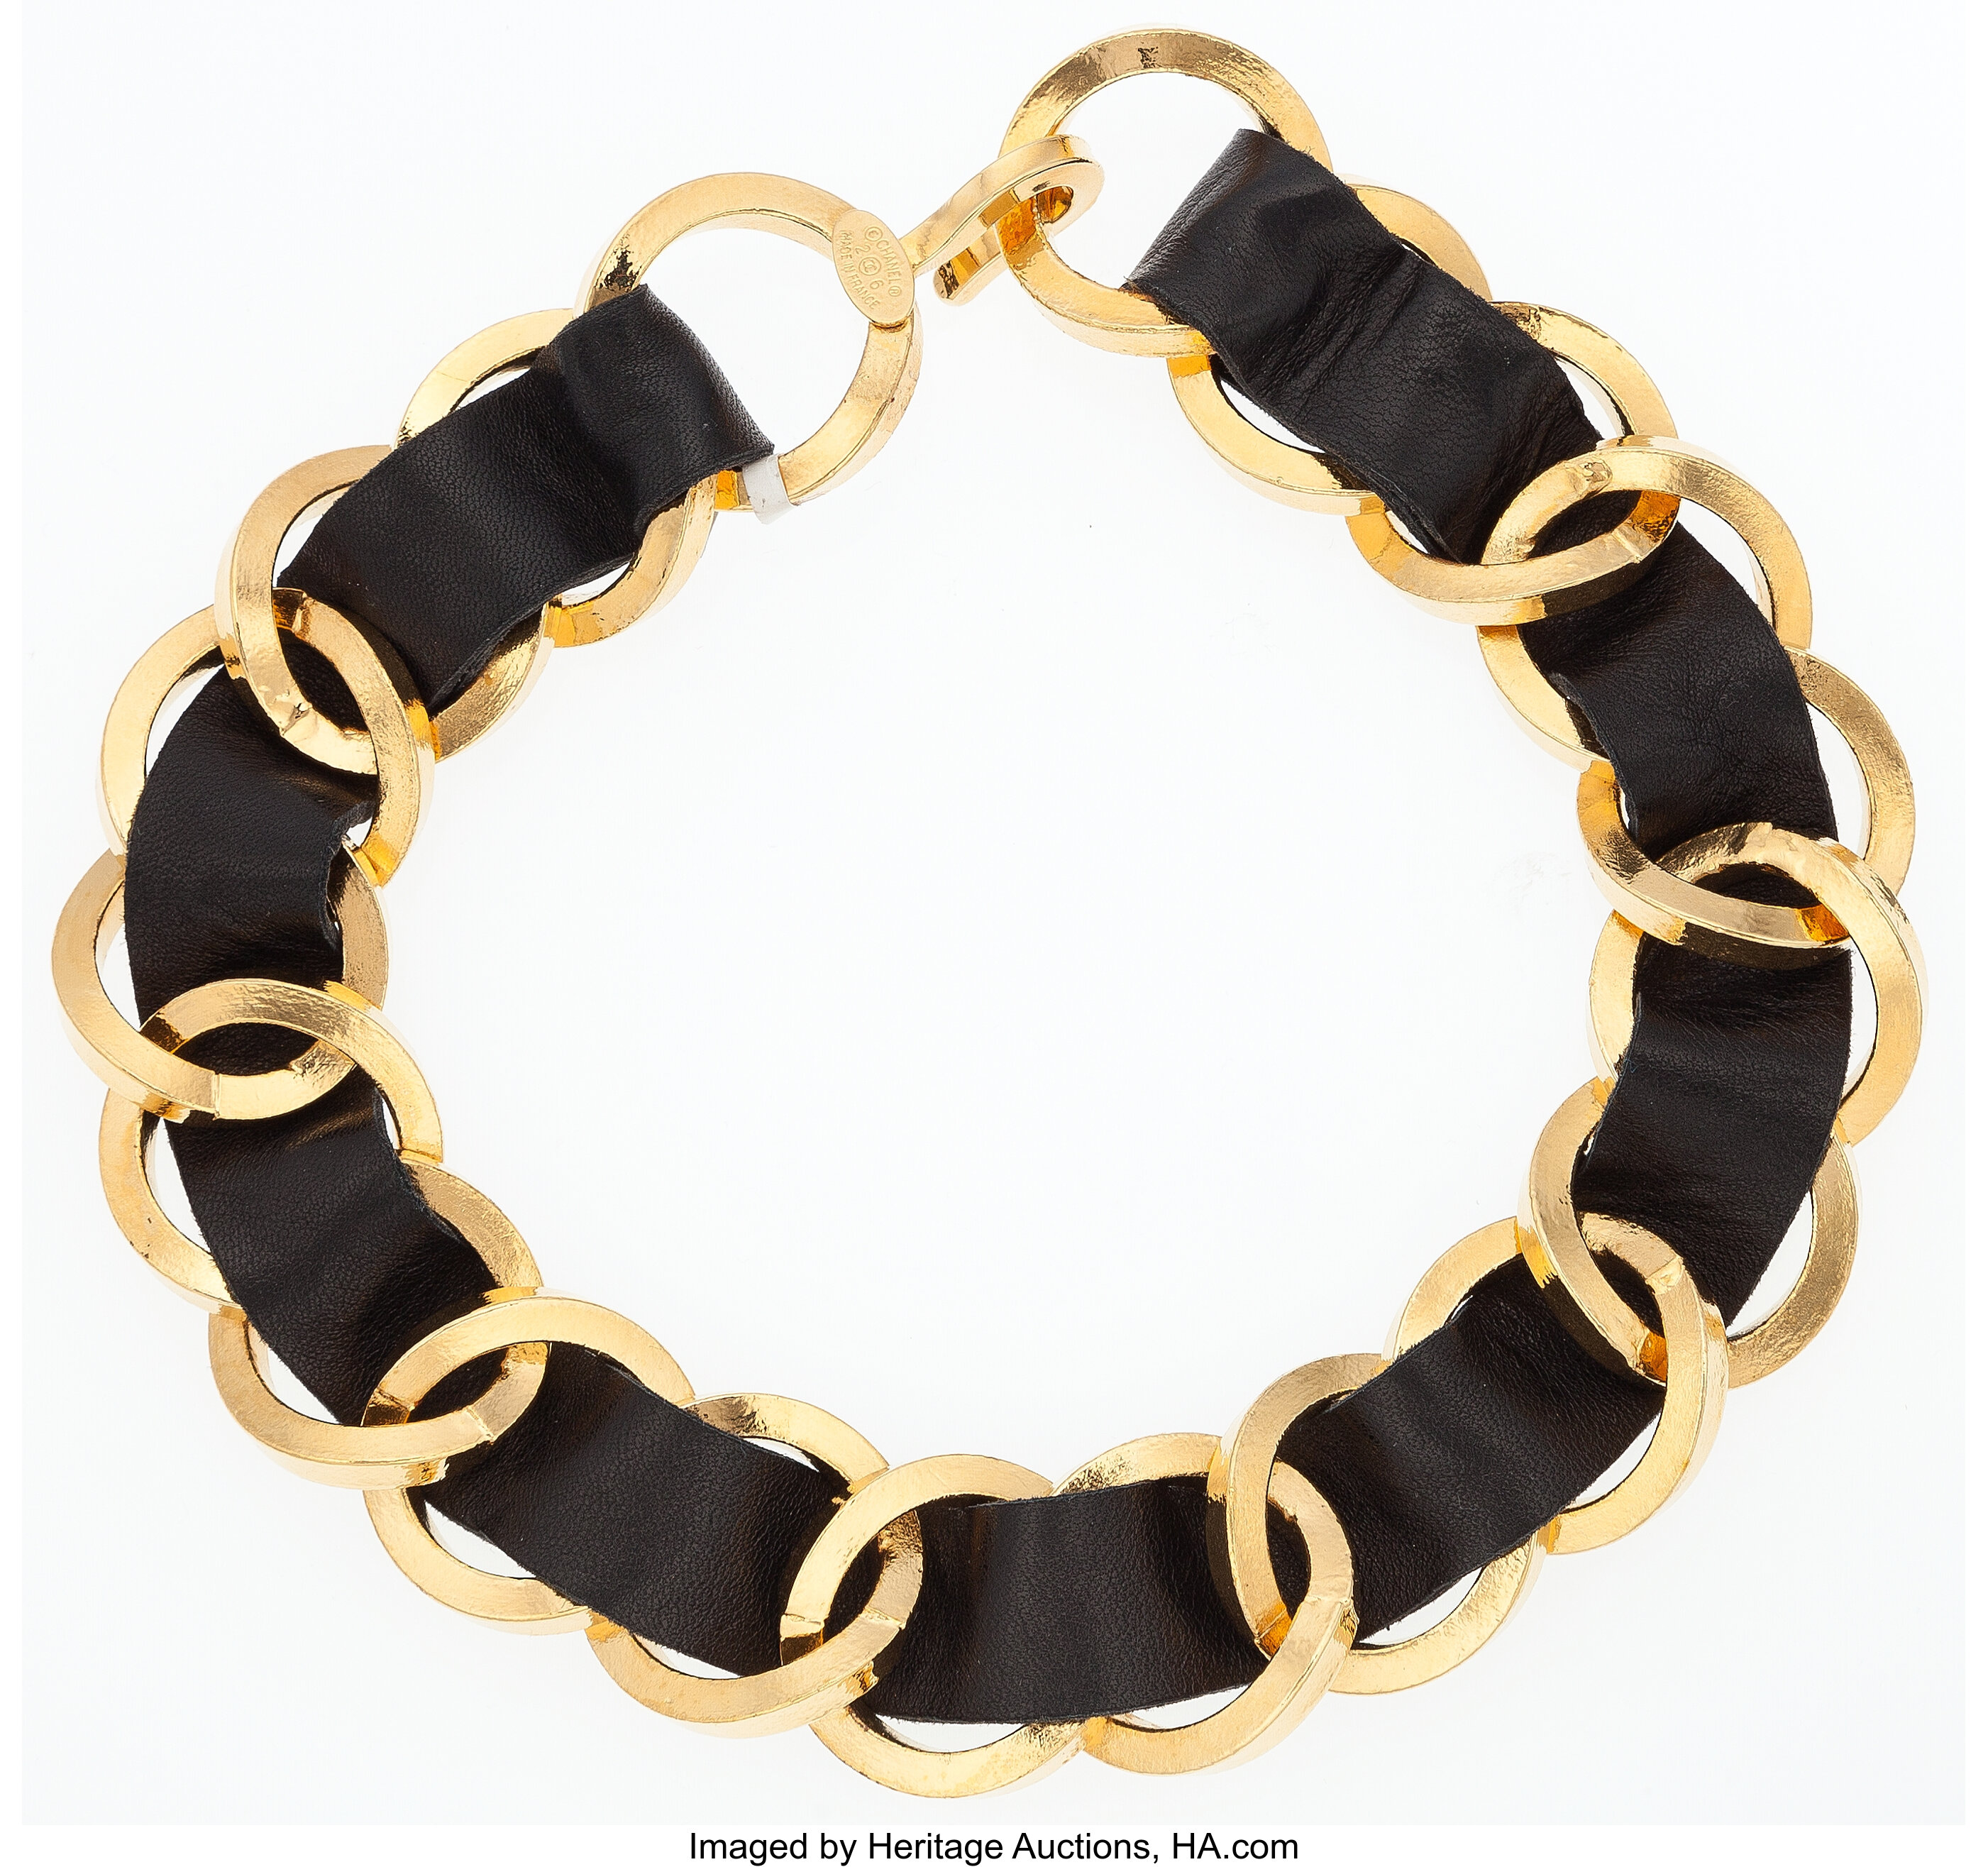 Affordable choker necklace For Sale, Luxury